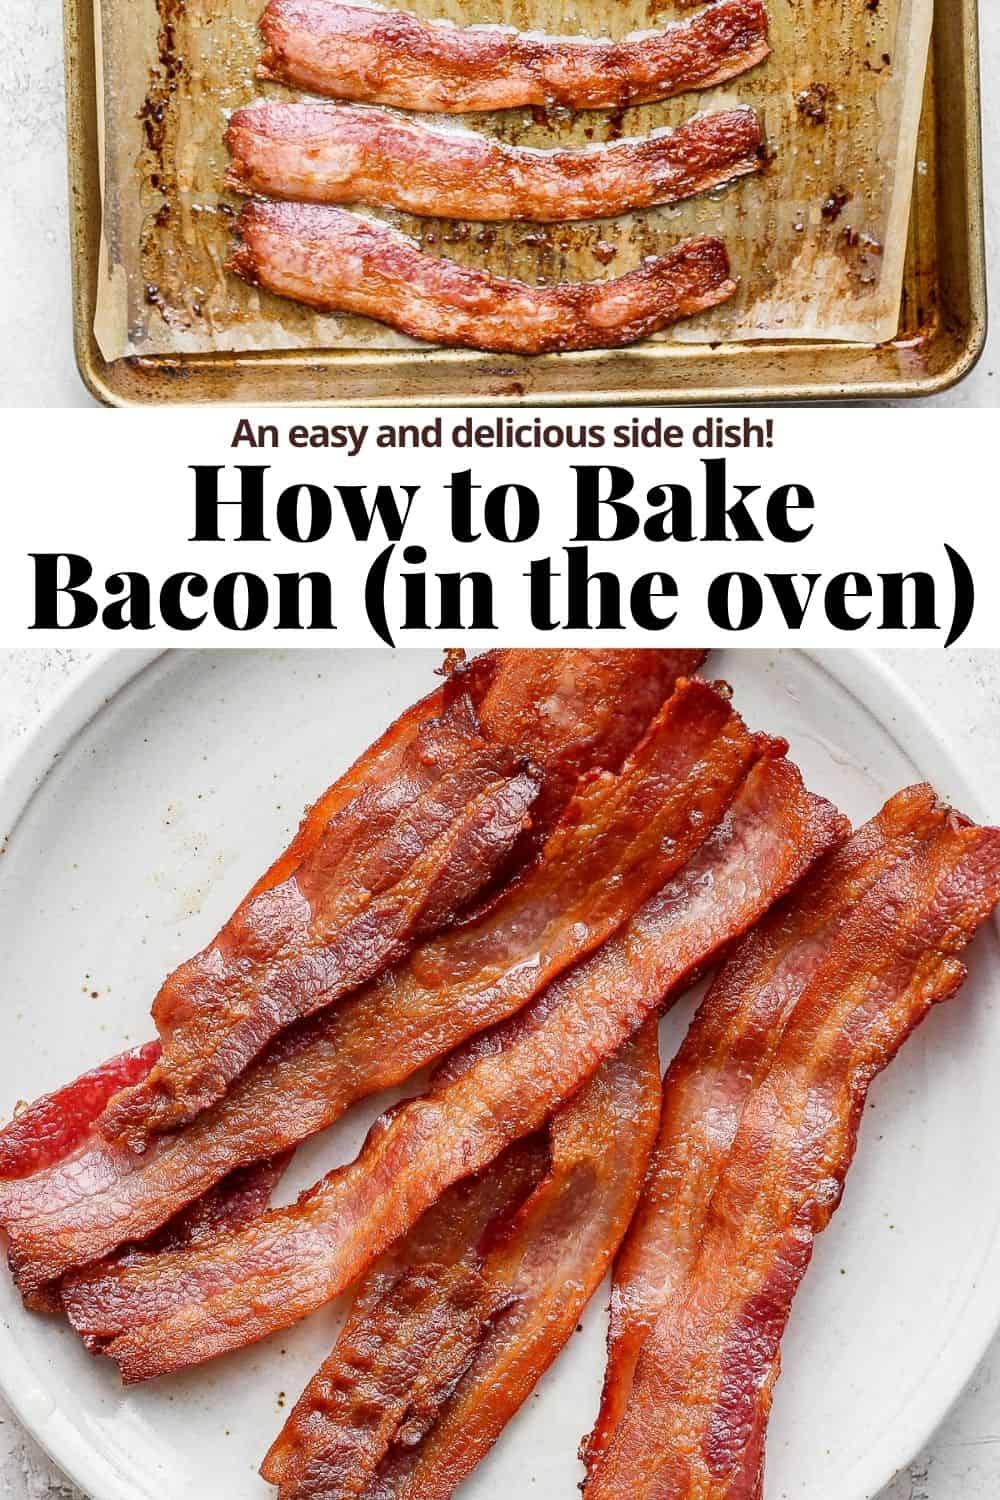 Pinterest image for how to bake bacon in the oven.